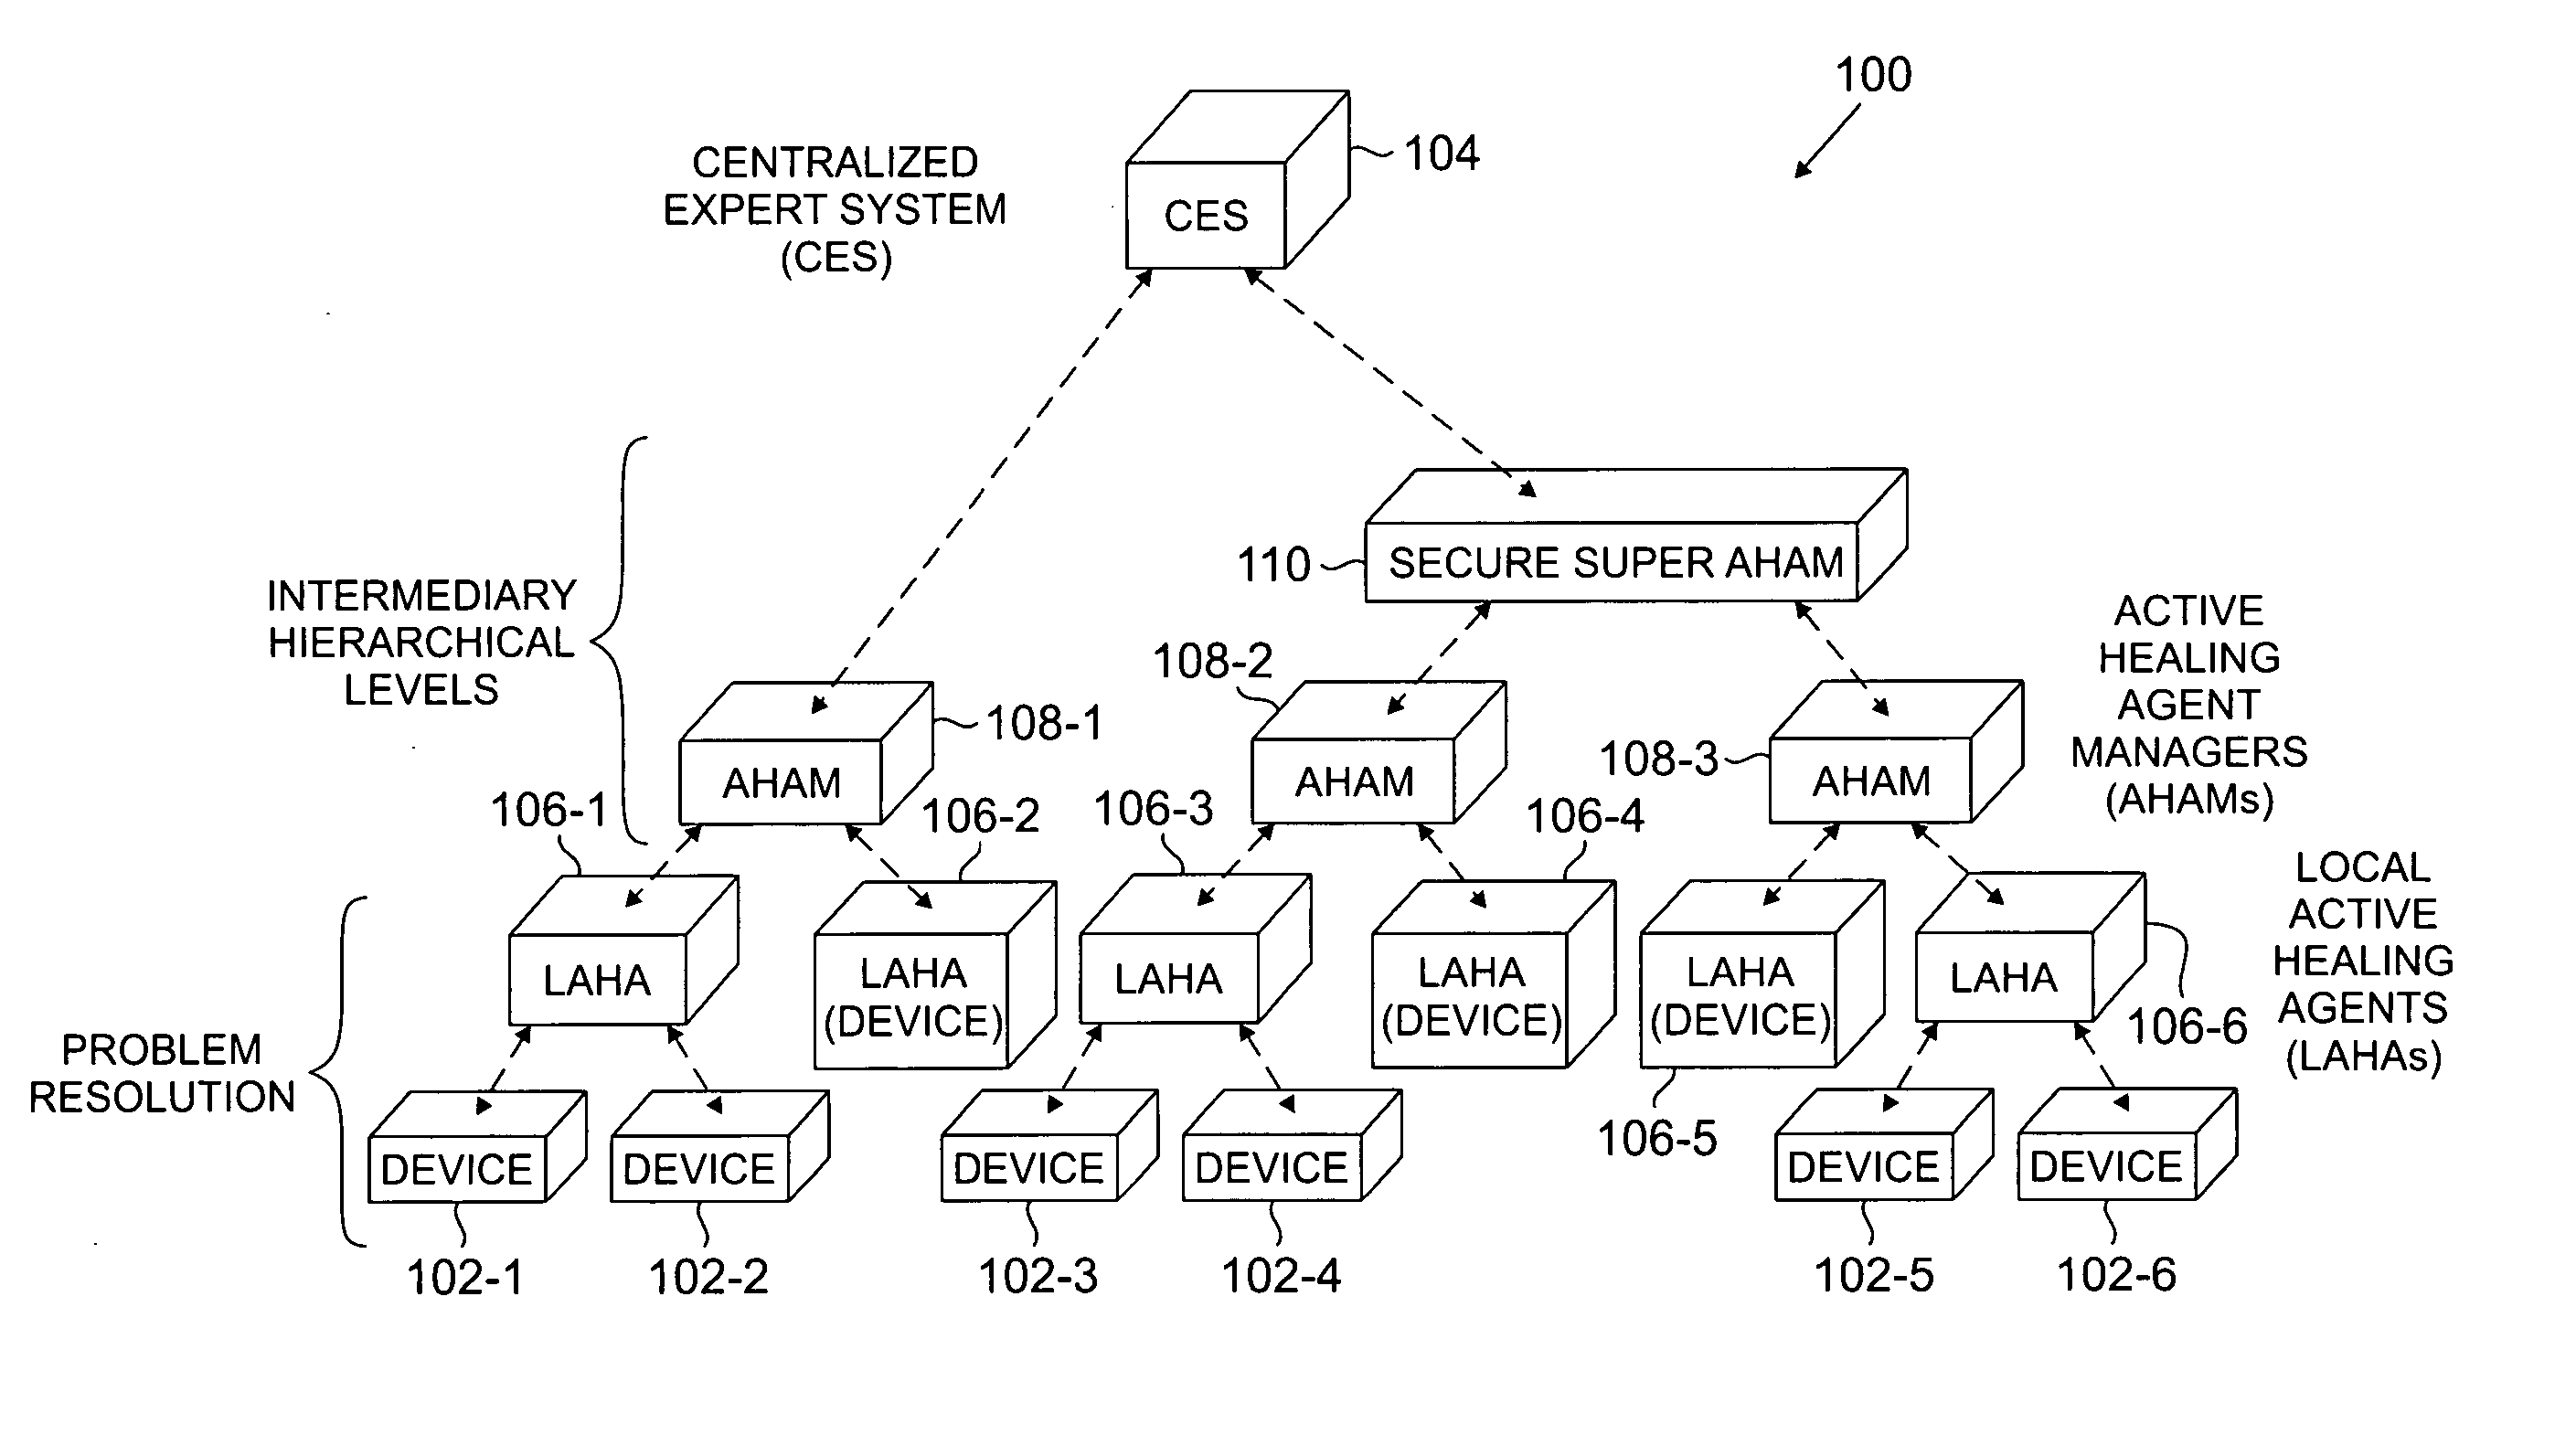 Distributed expert system for automated problem resolution in a communication system